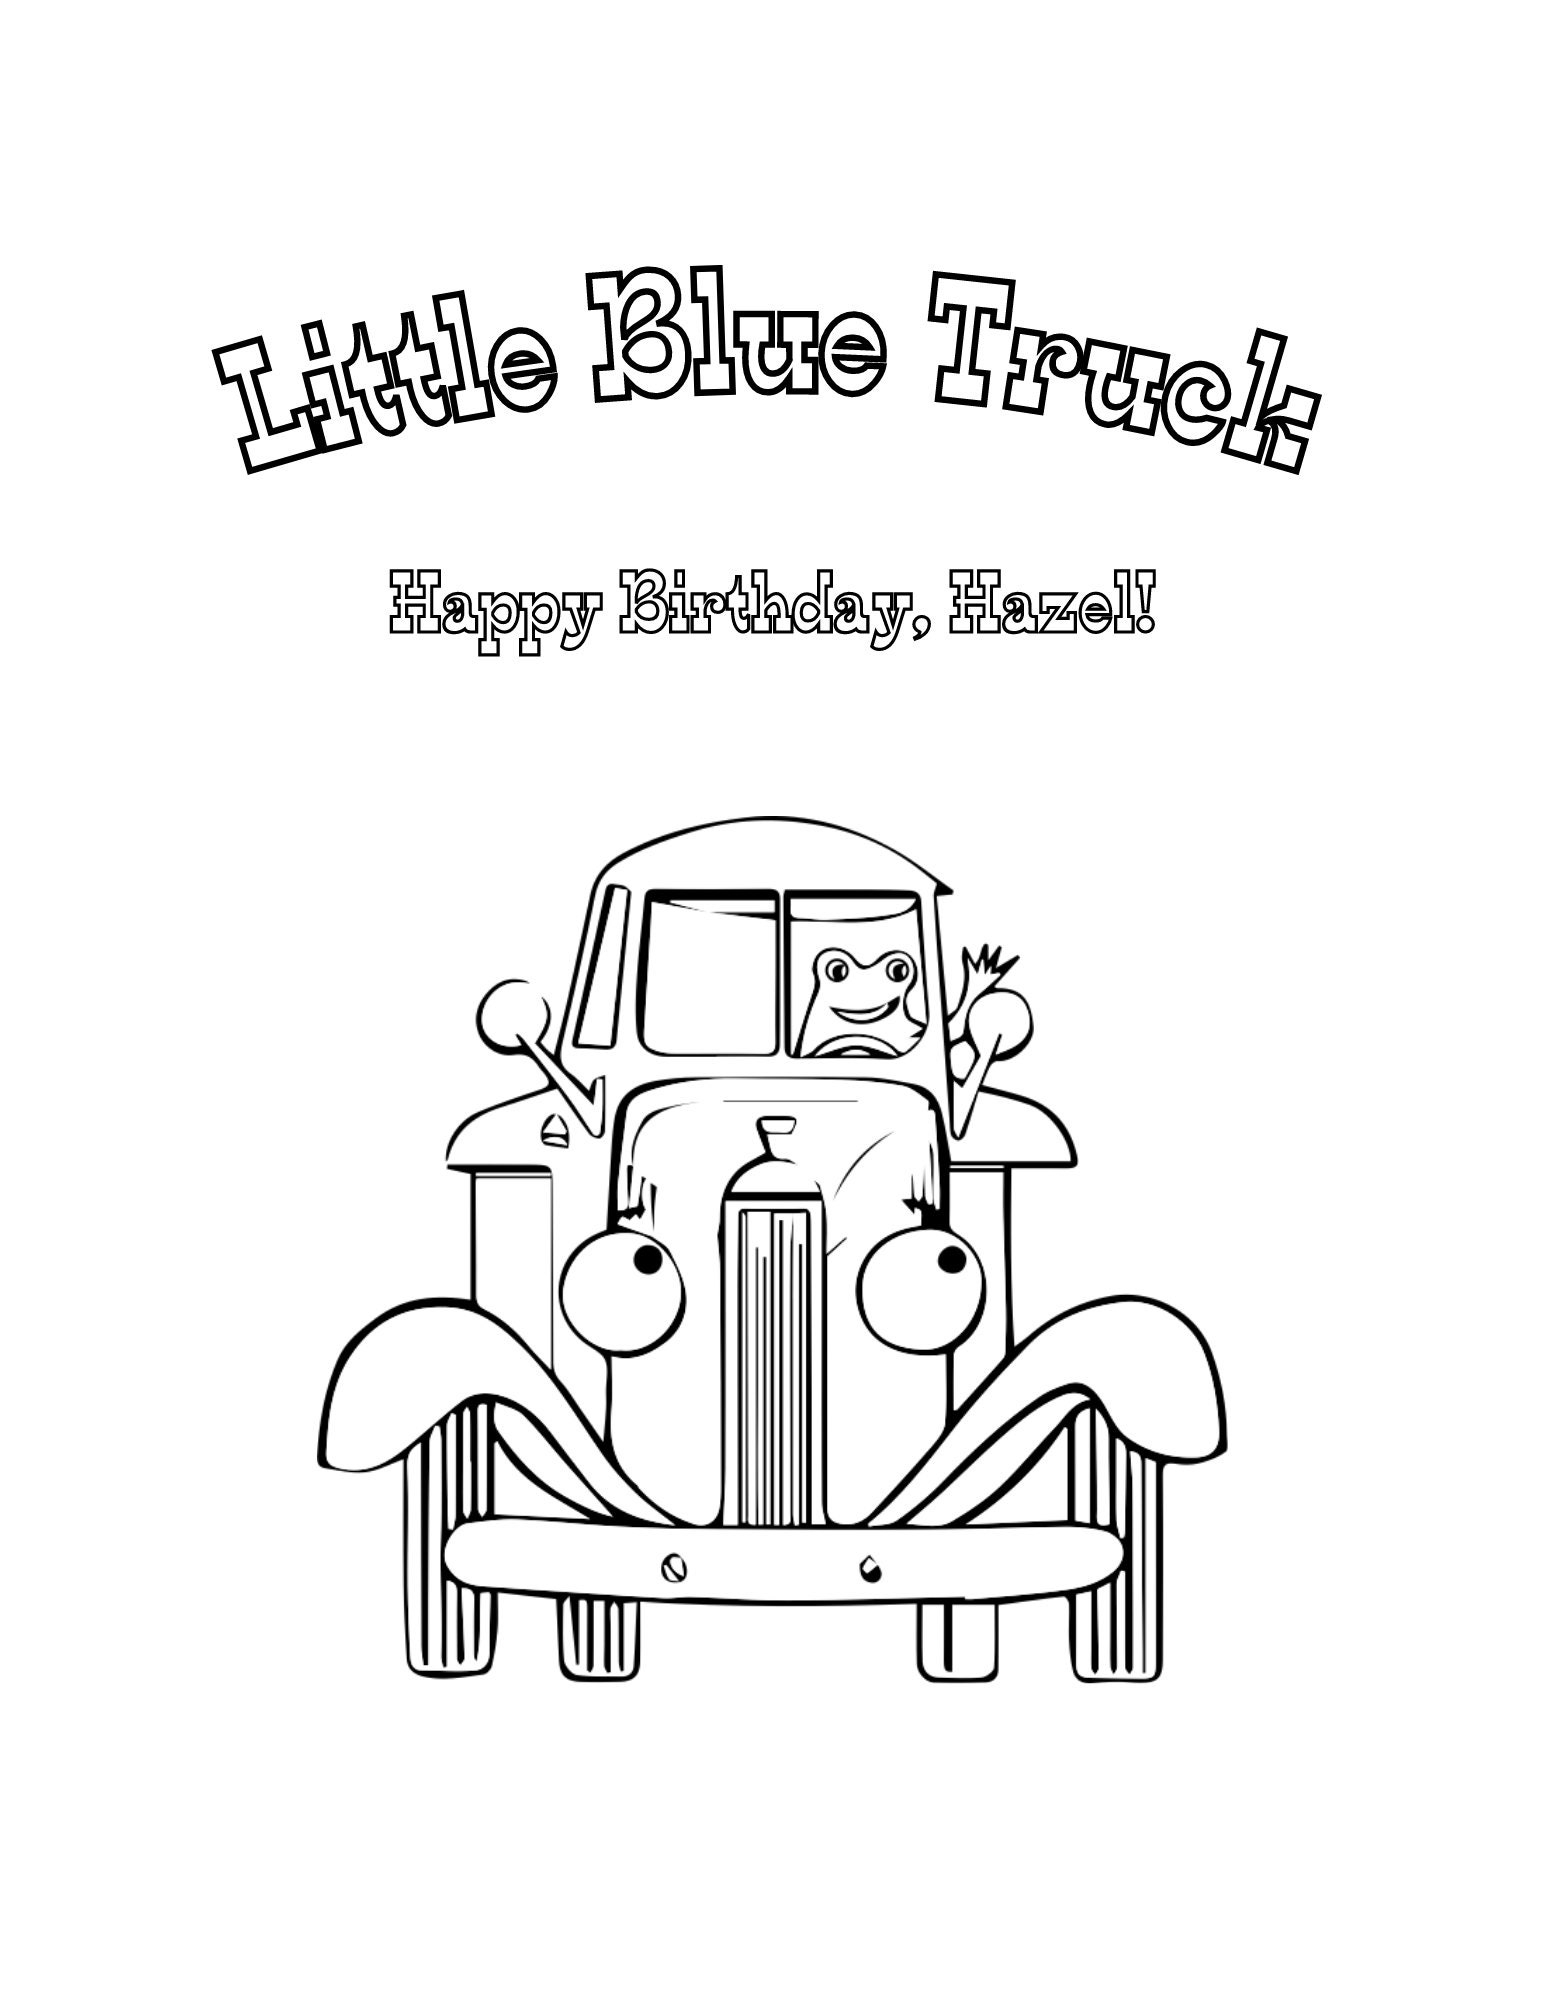 Editable Personalized Little Blue Truck Coloring Book party Favor Etsy